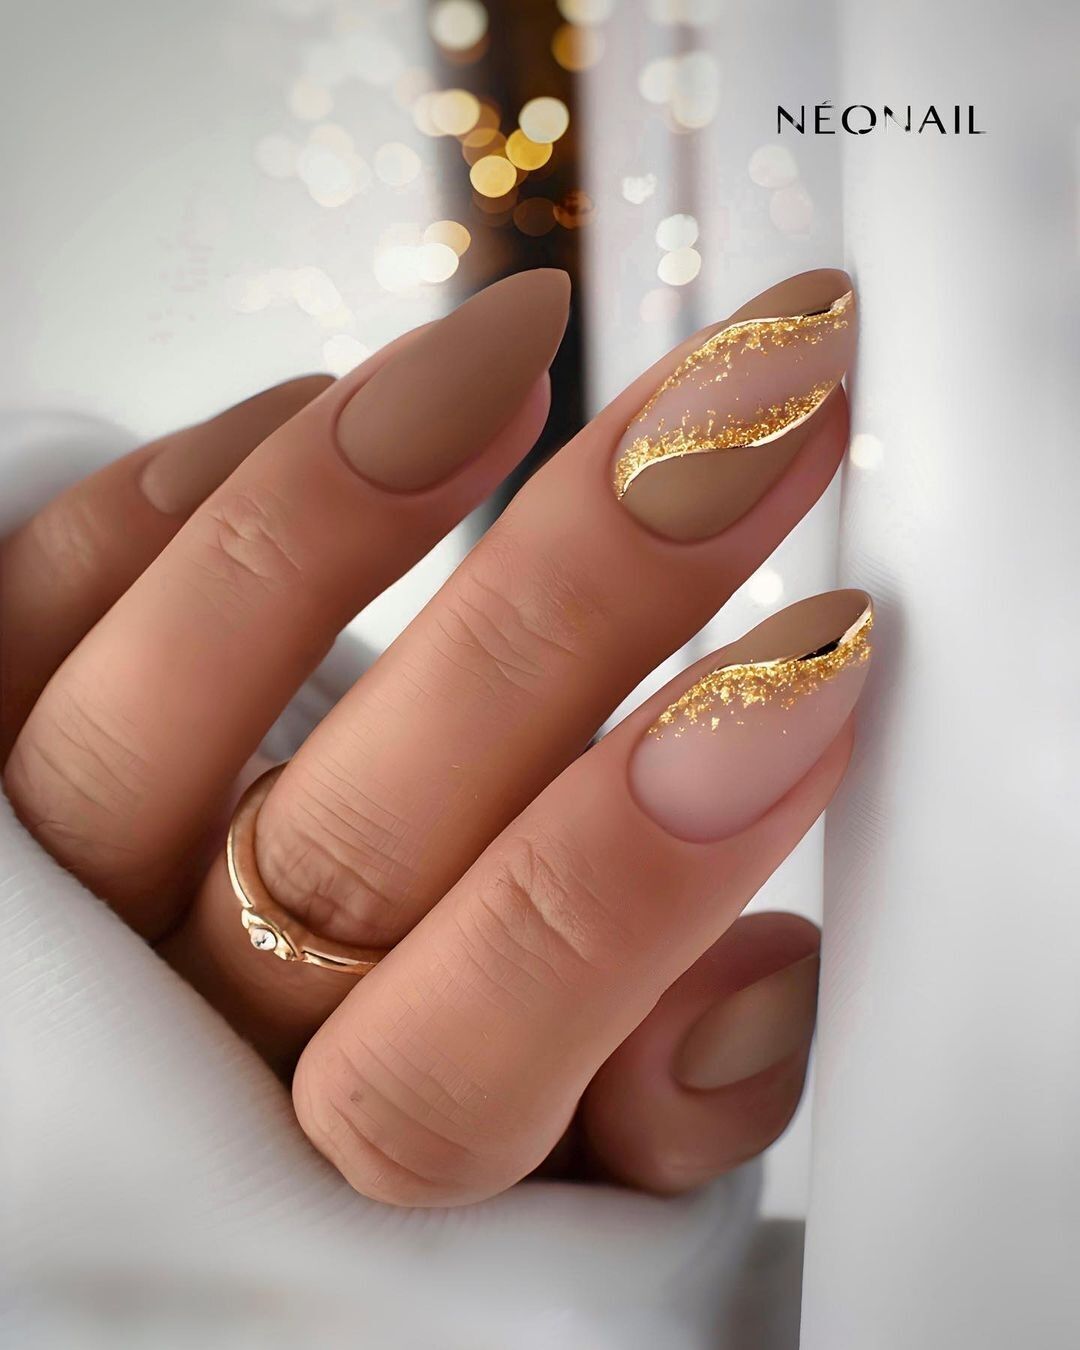 Manicure for the New Year: 7 exquisite designs for long nails. Photo